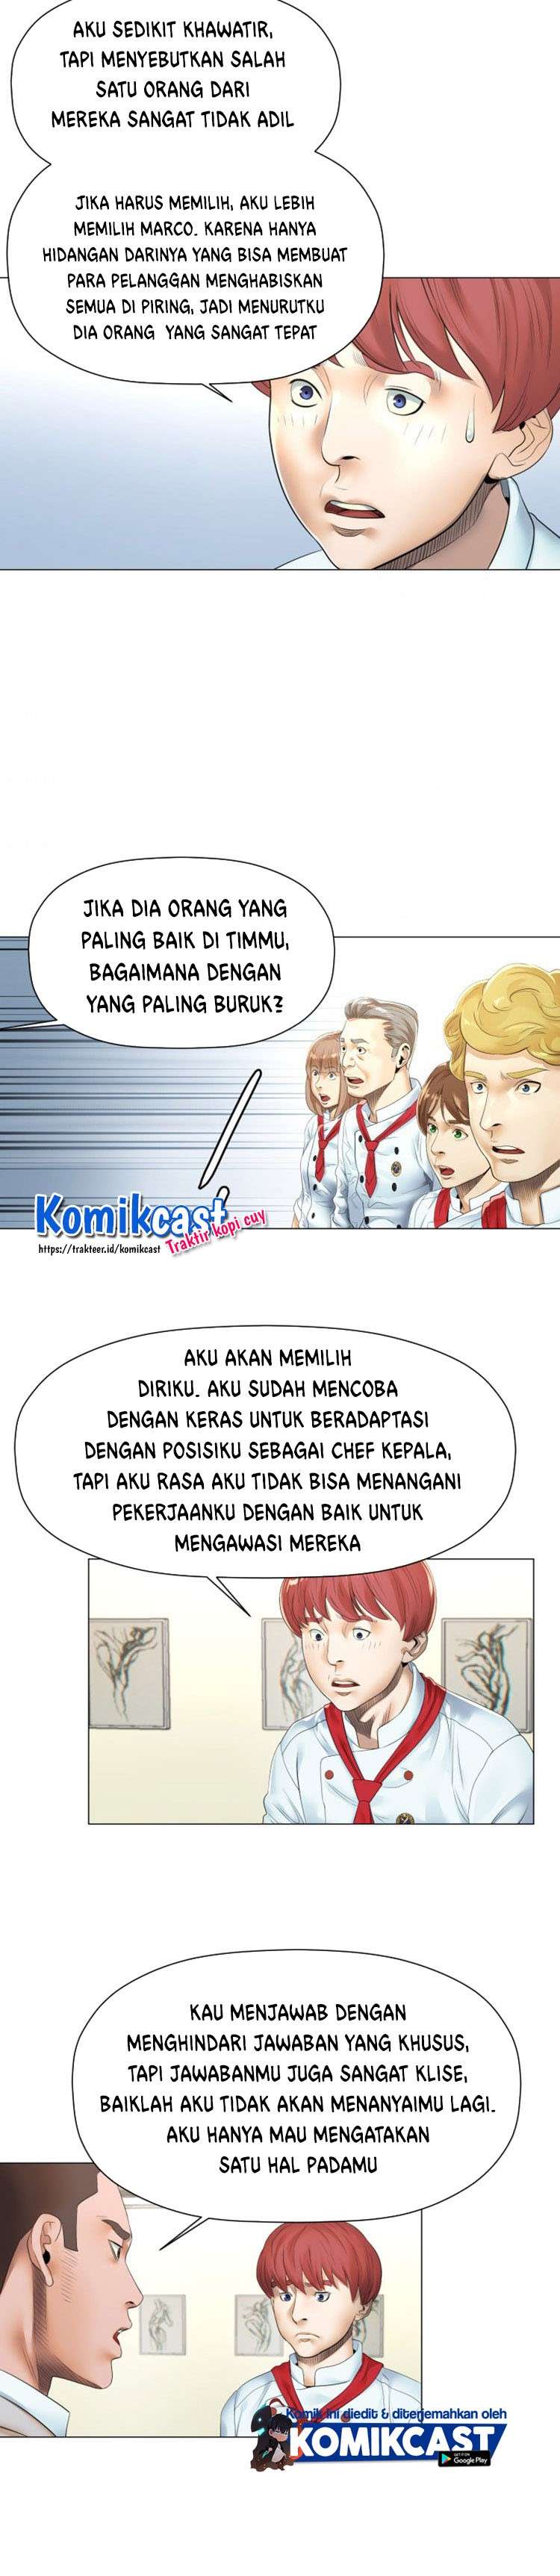 God of Cooking Chapter 21